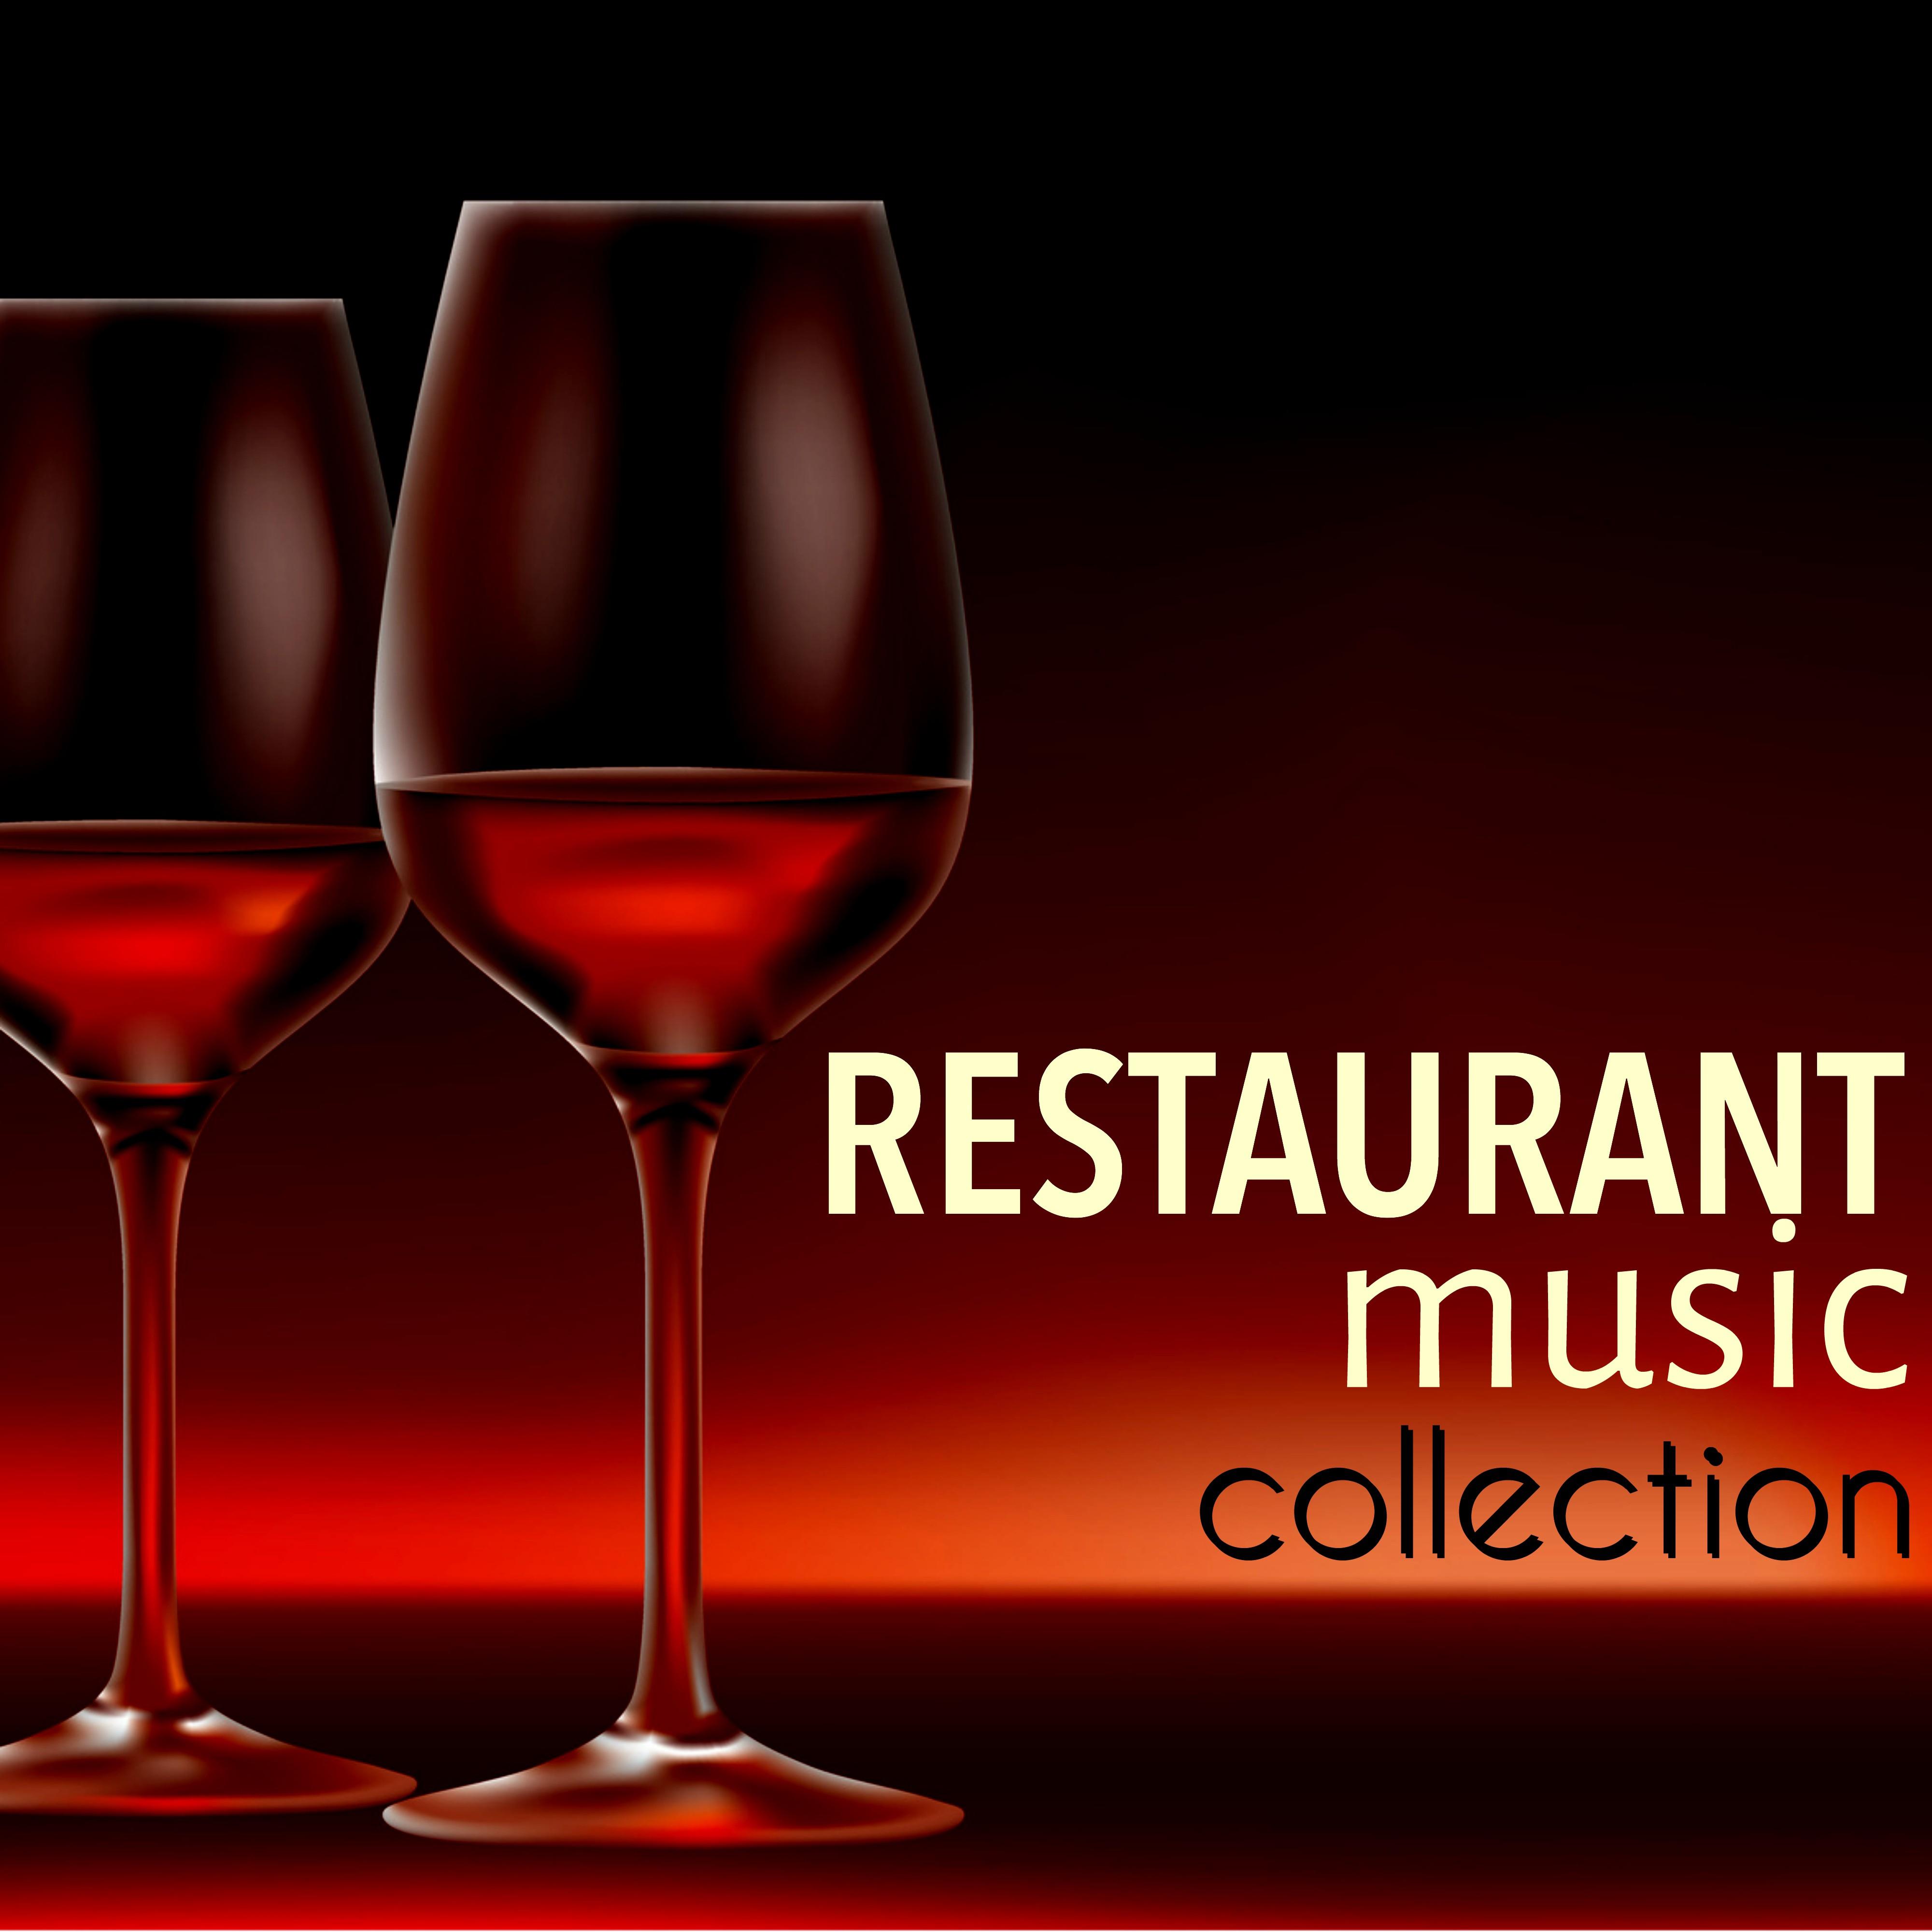 Restaurant Music Collection  Big Band Jazz Background and Blues, Relaxing Piano Dinner Music, Sax and Piano Songs